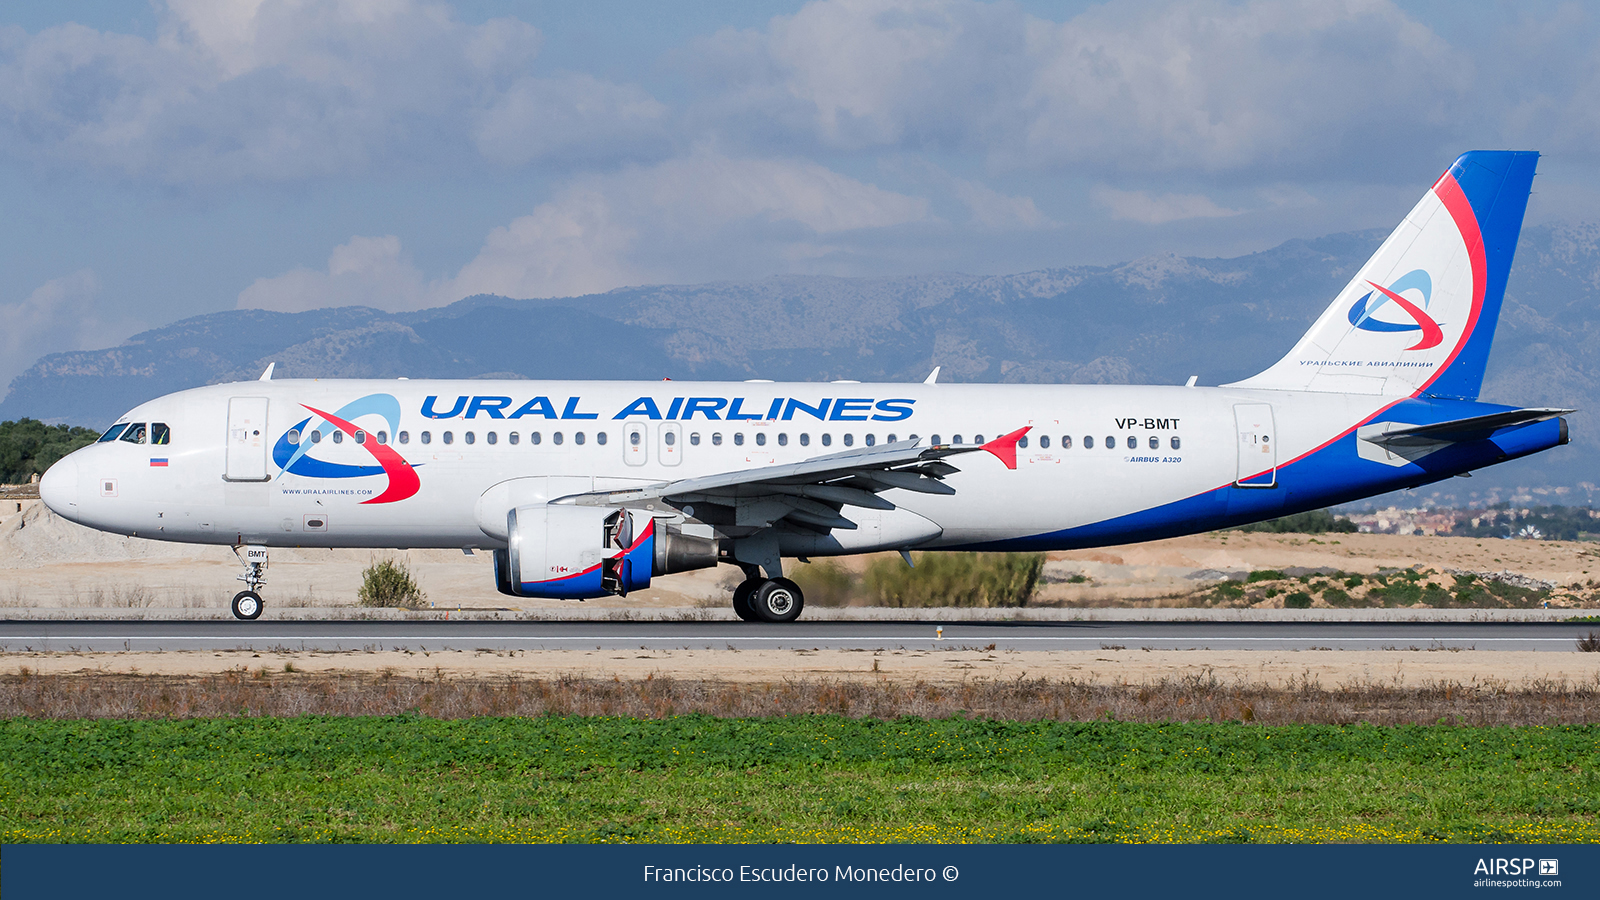 Ural Airlines  Airbus A320  VP-BMT